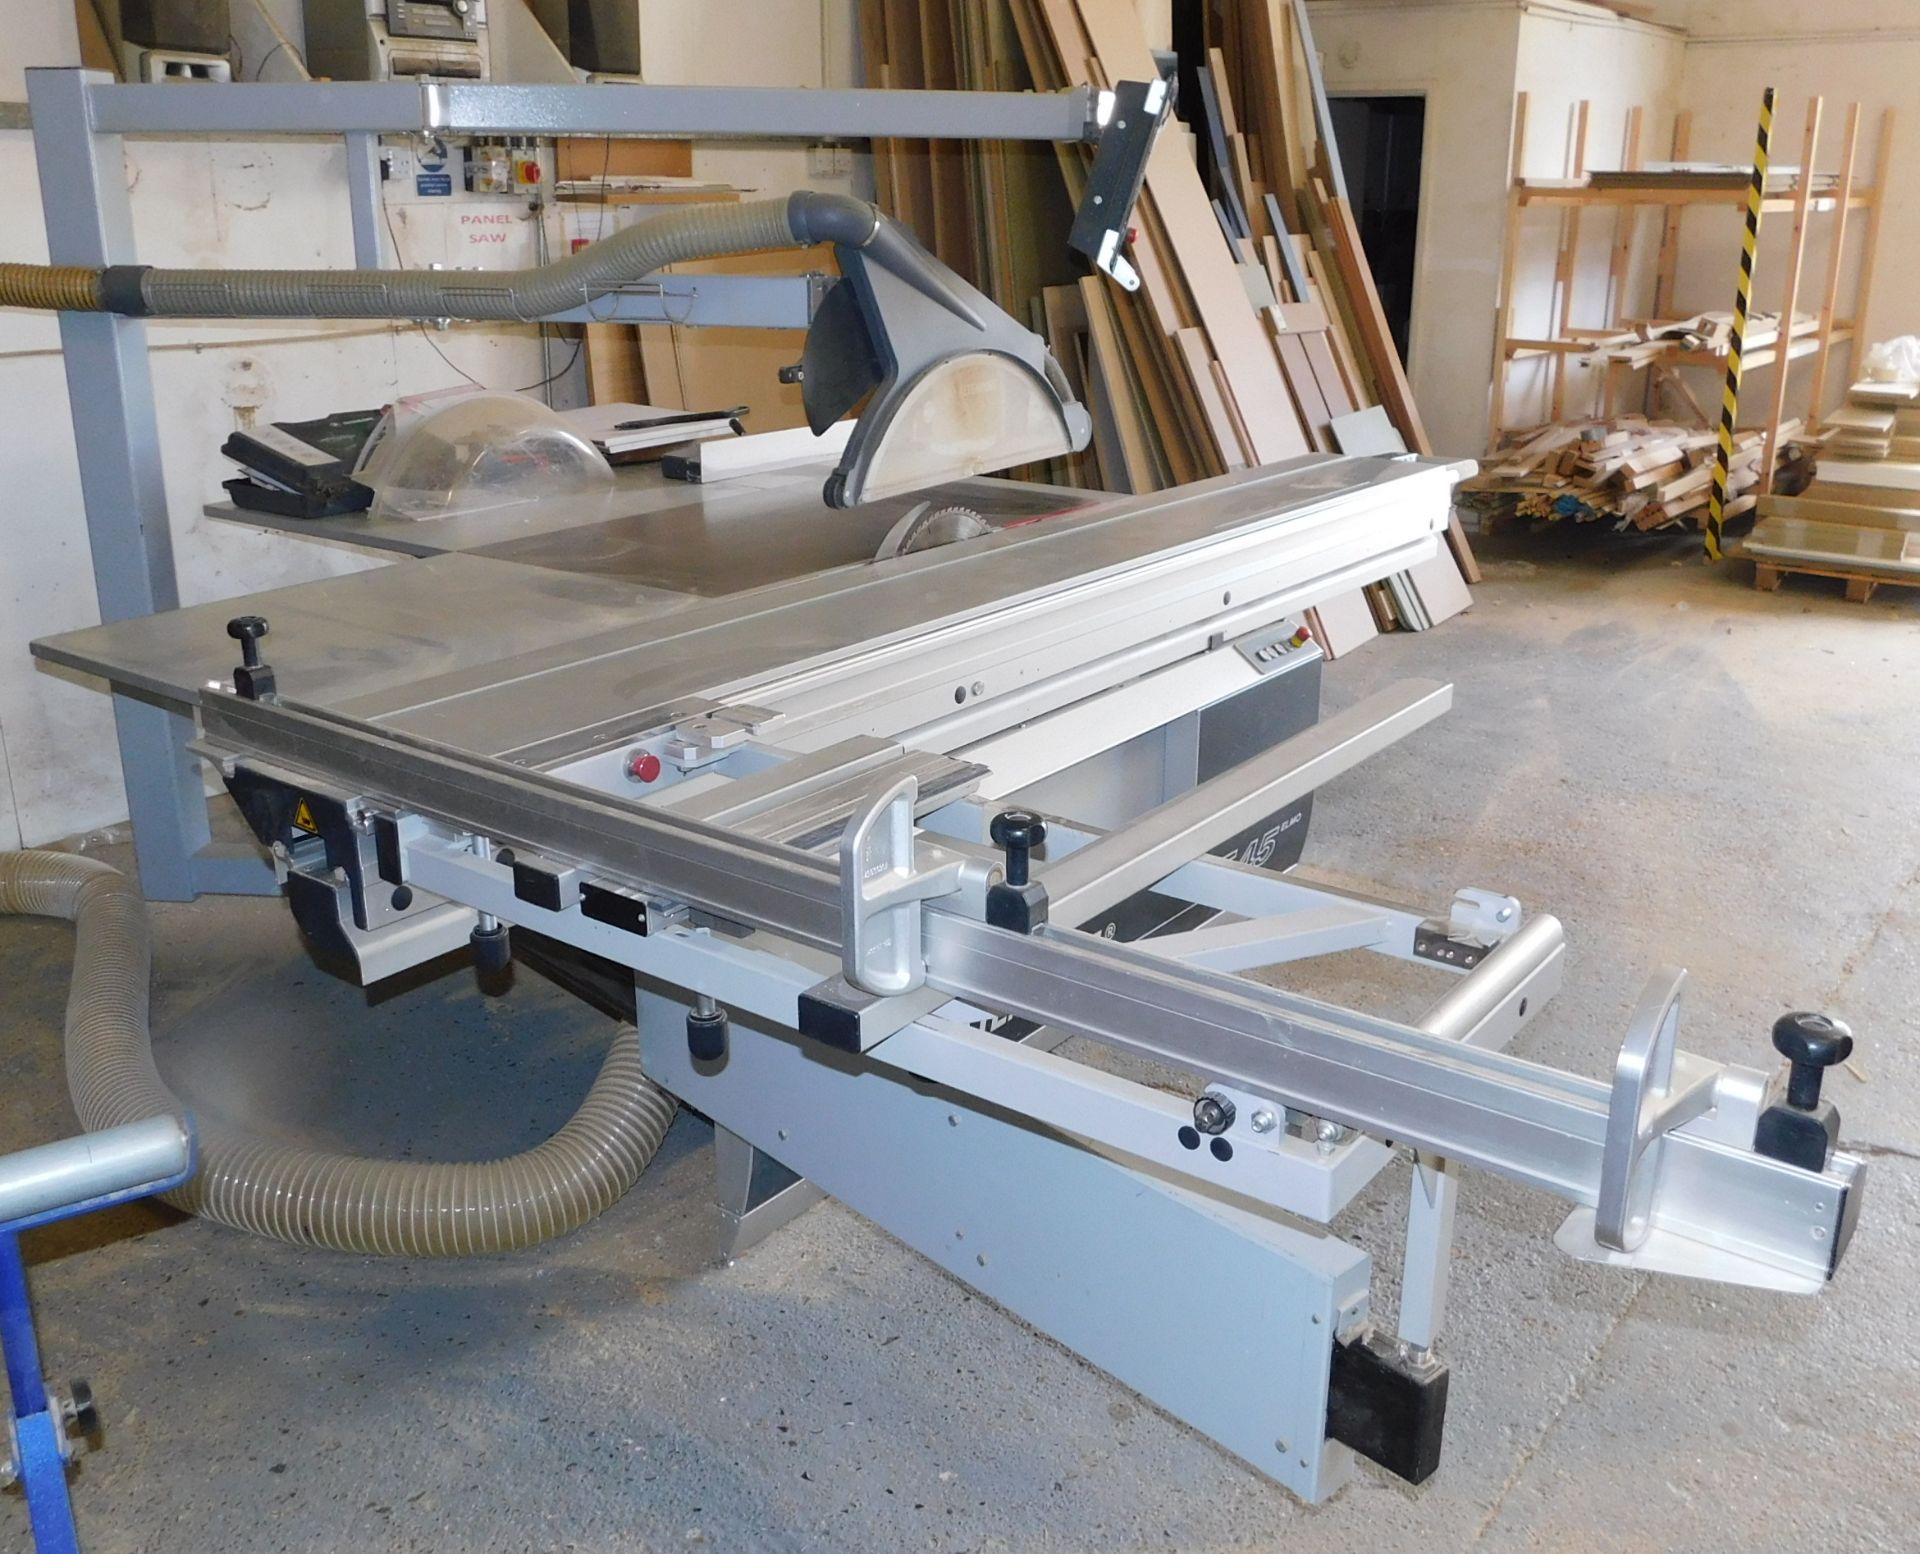 Altendorf F45 Elmo III Sliding Table Saw (2012) Serial Number 12-07-10-056 With Rise/Fall & Tilt - Image 10 of 11